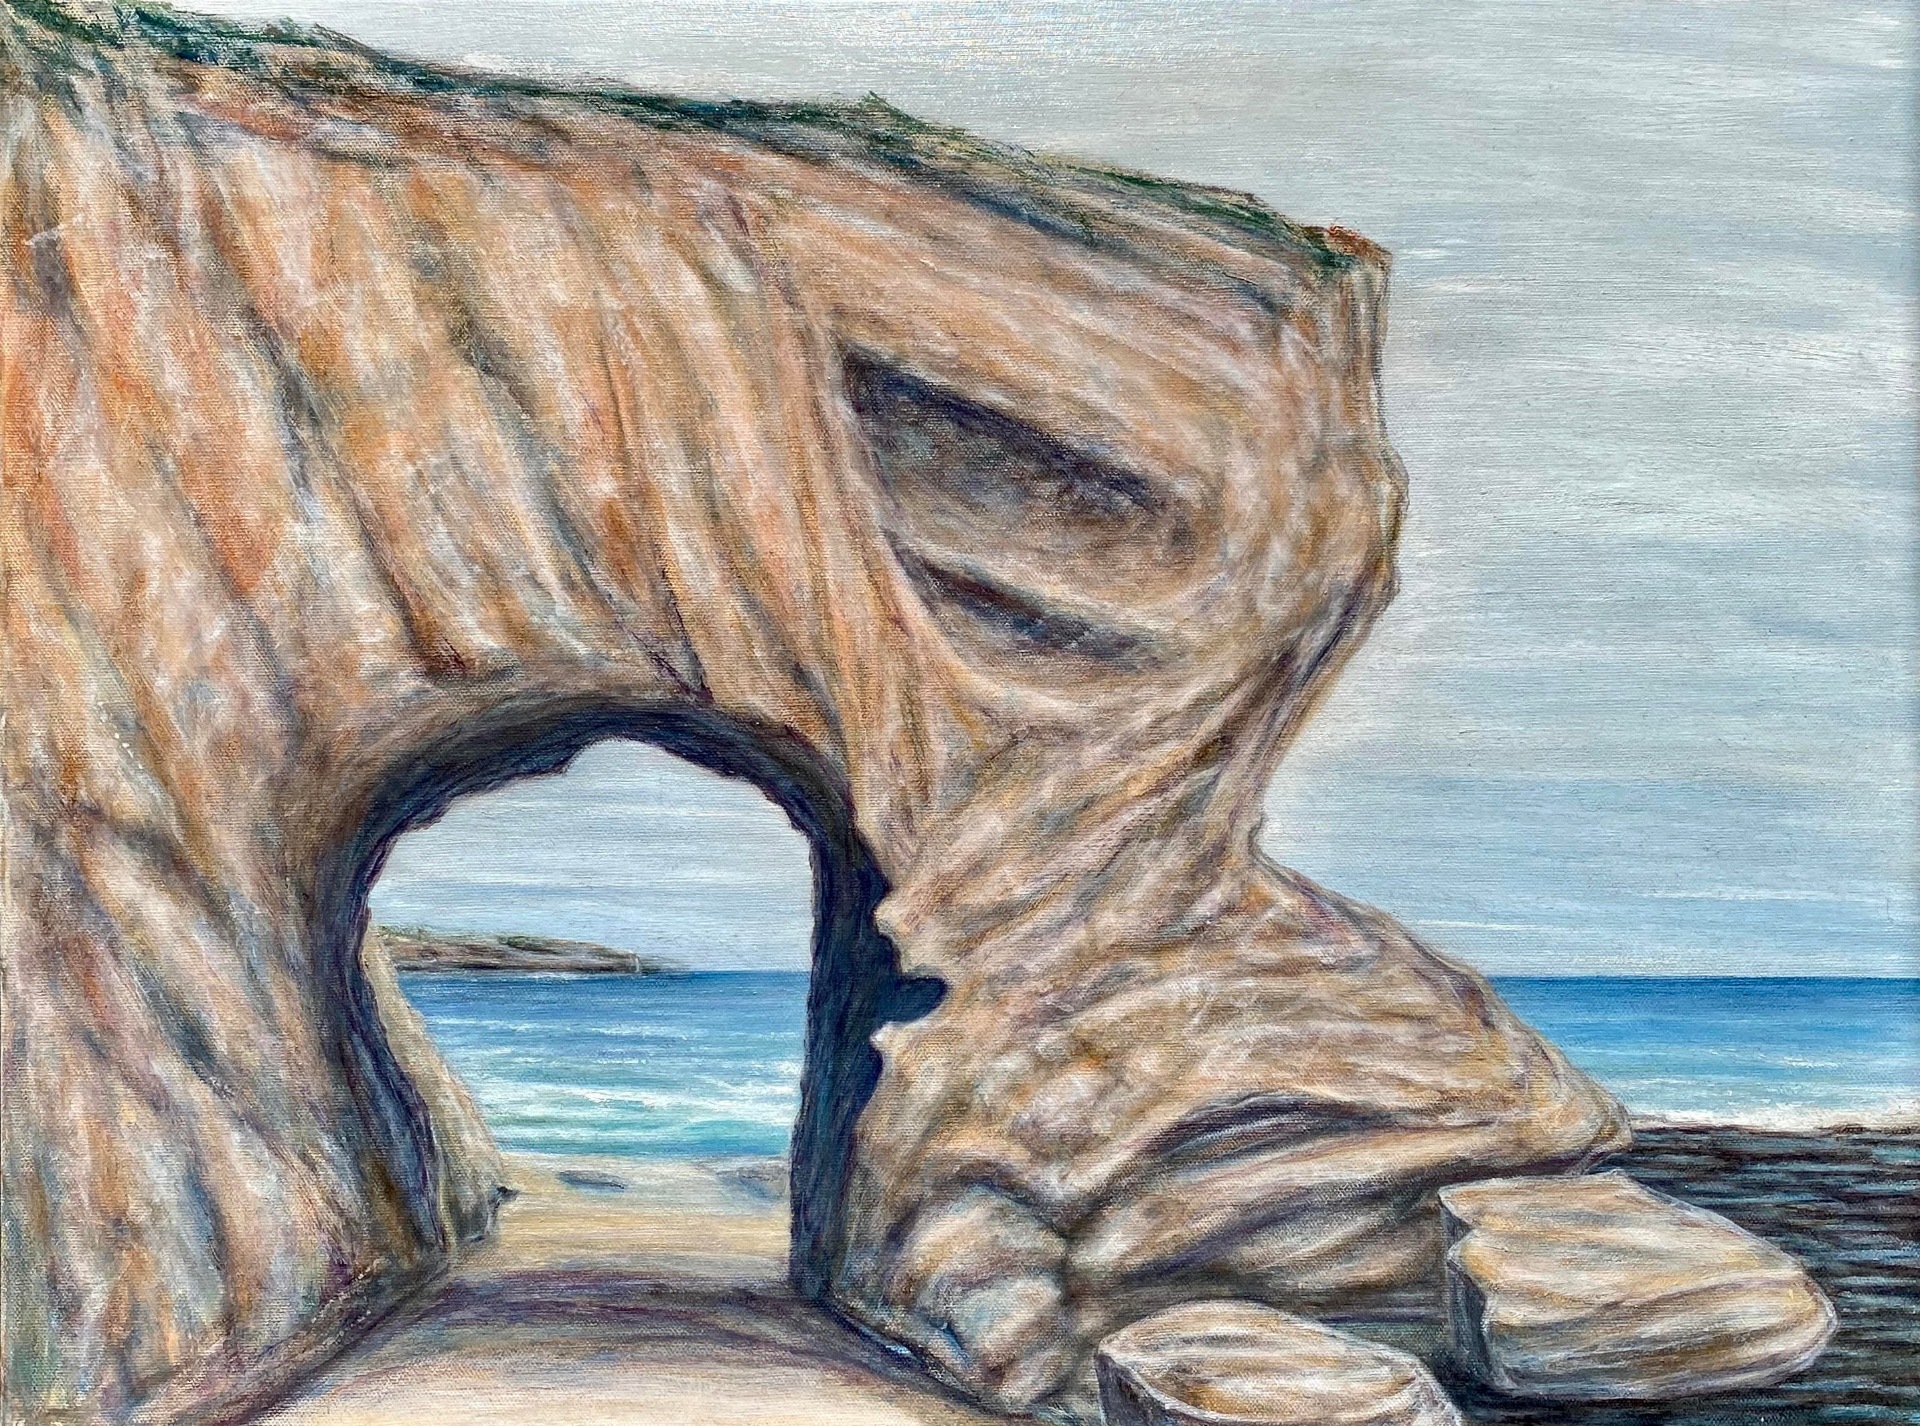 'The Archway' - study in the Motif